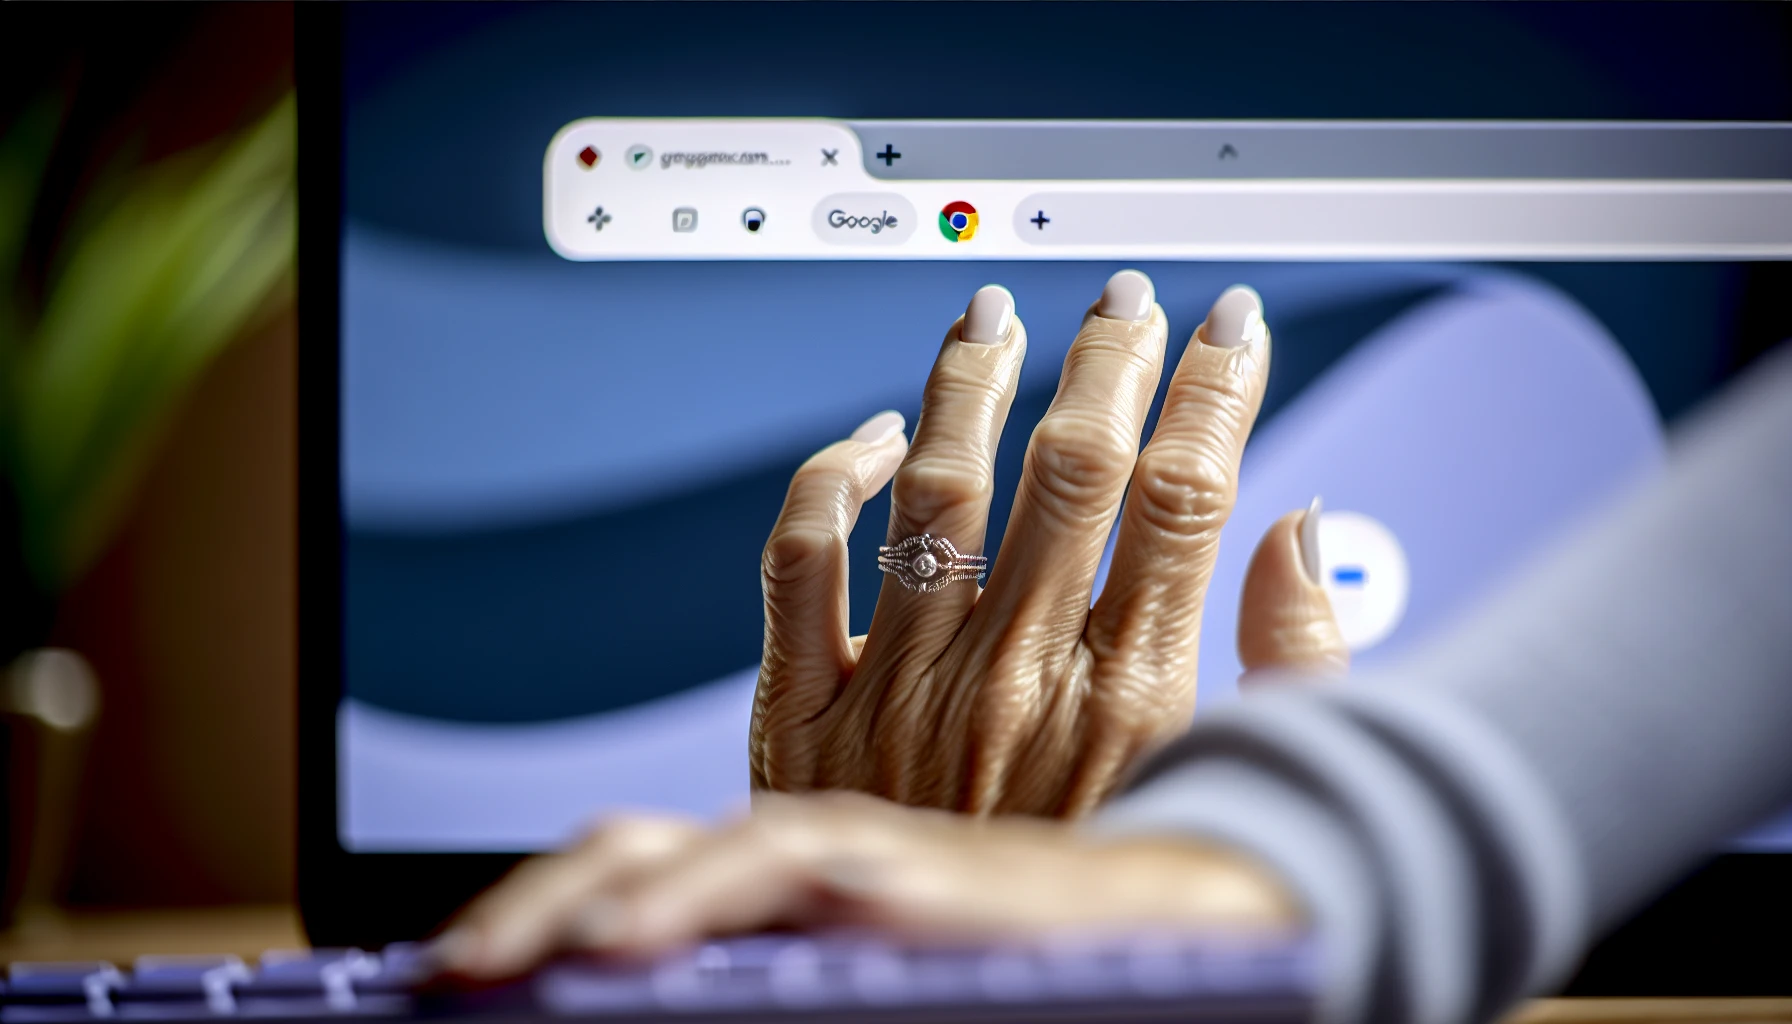 Person clicking on the three-dot icon in the top-right corner of Google Chrome browser